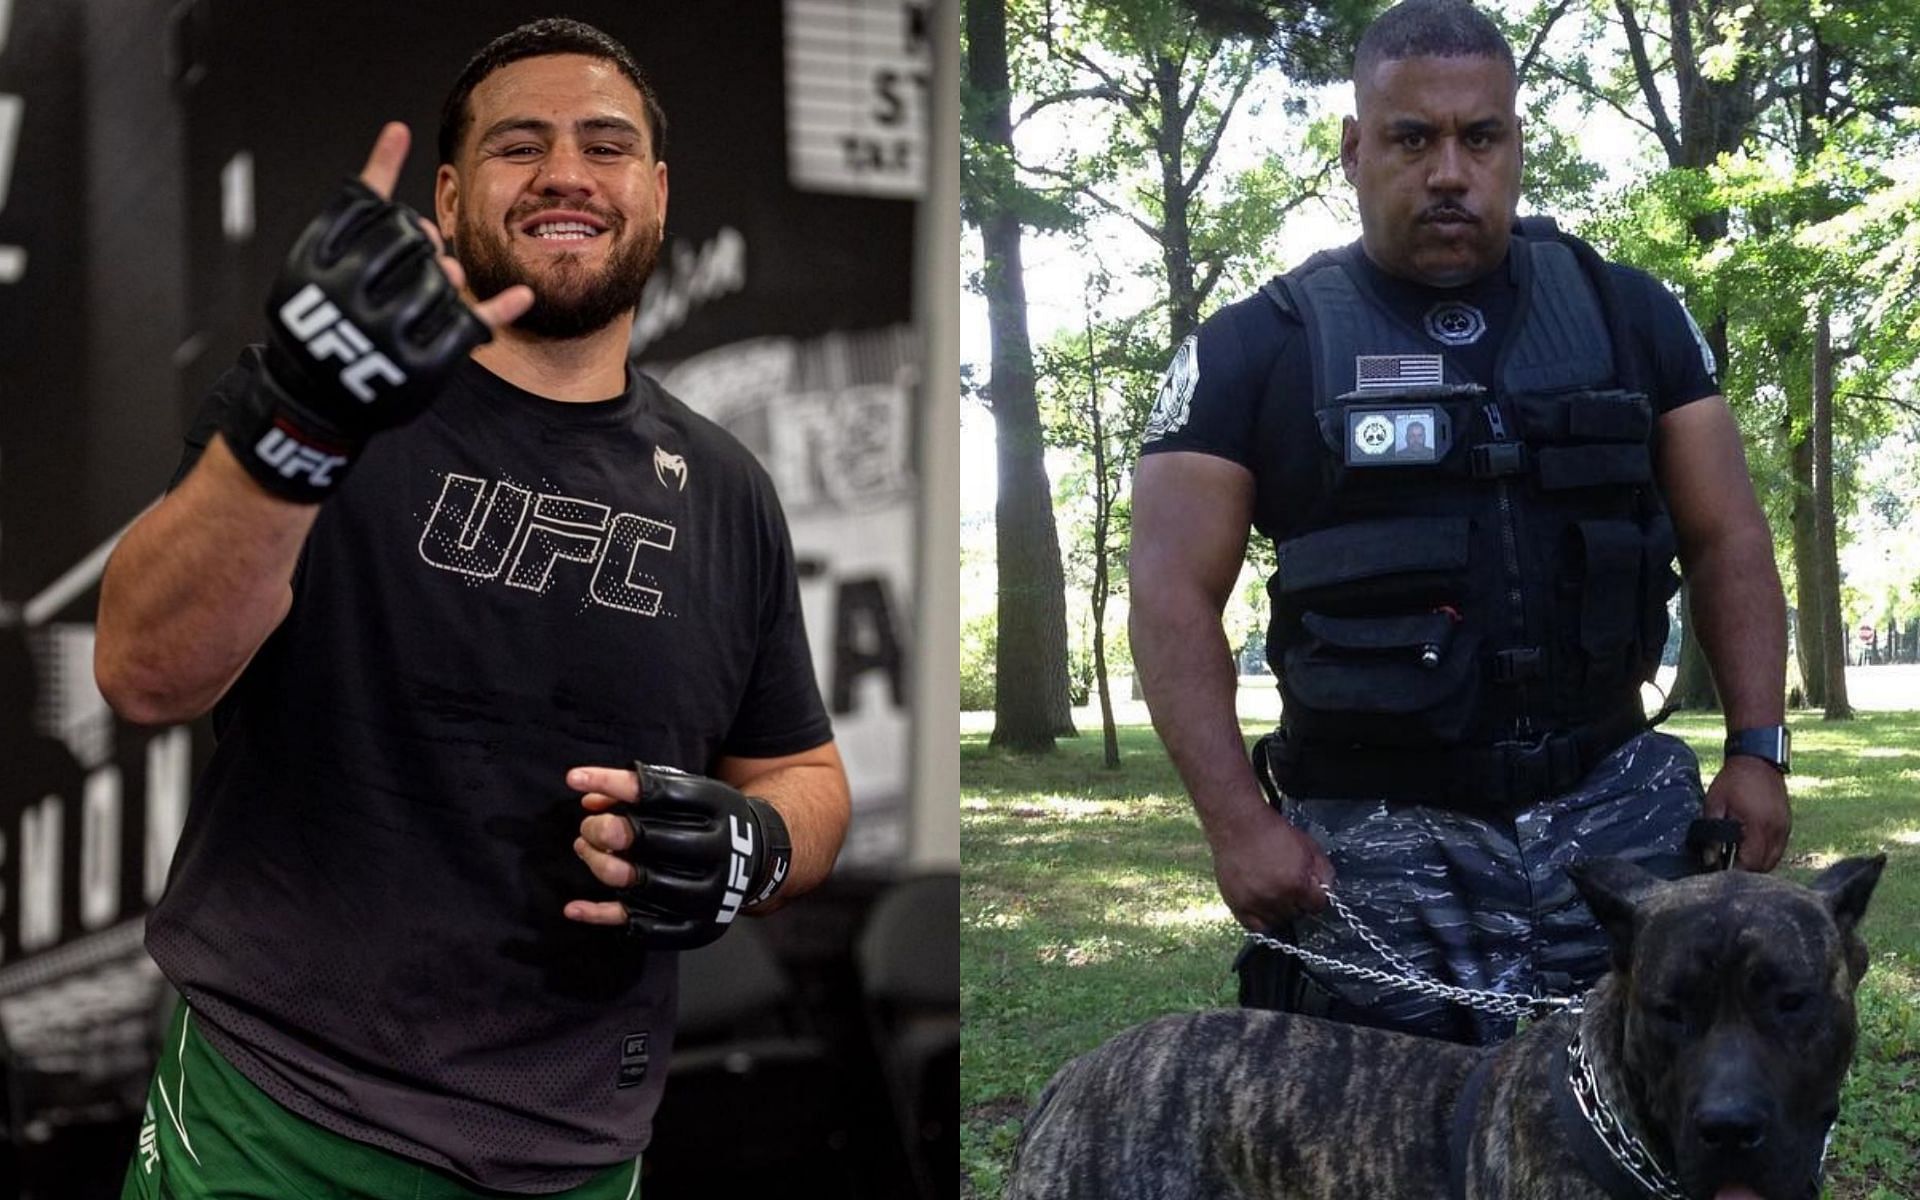 Tai Tuivasa (Left), Dale Brown (Right) [Image credits @bambamtuivasa, @threat_manager on Instagram]